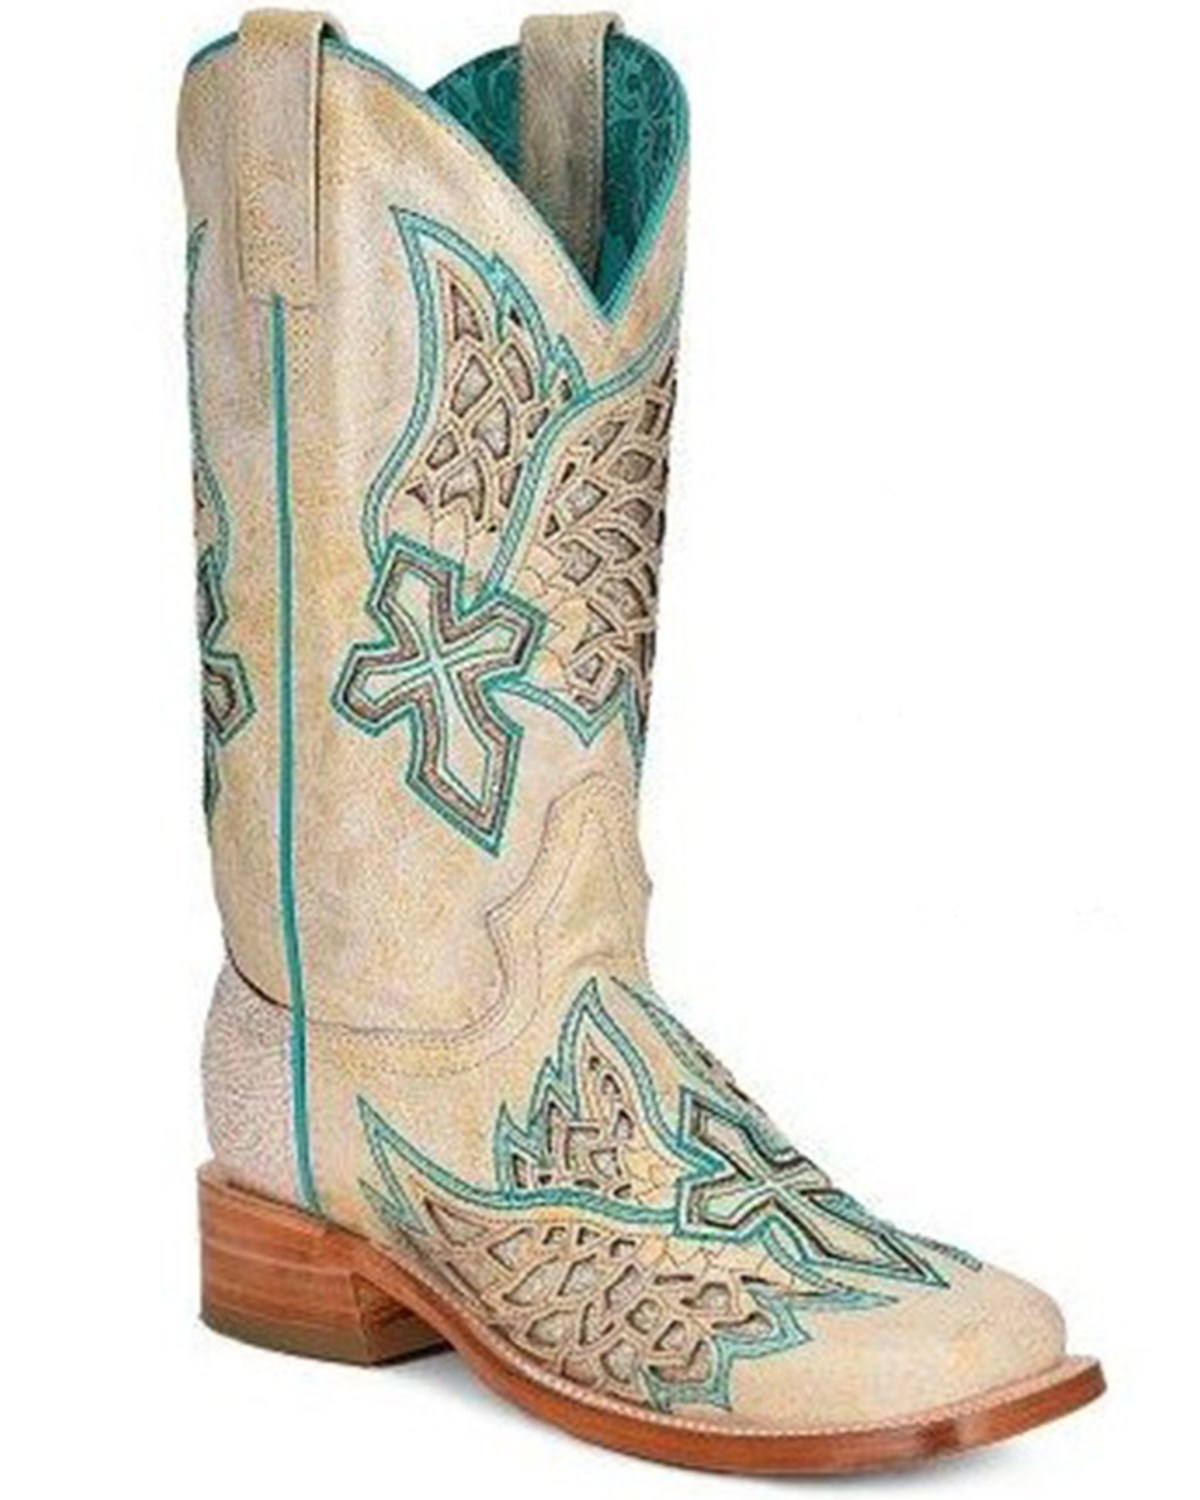 Corral Women's Cross Western Boots - Broad Square Toe